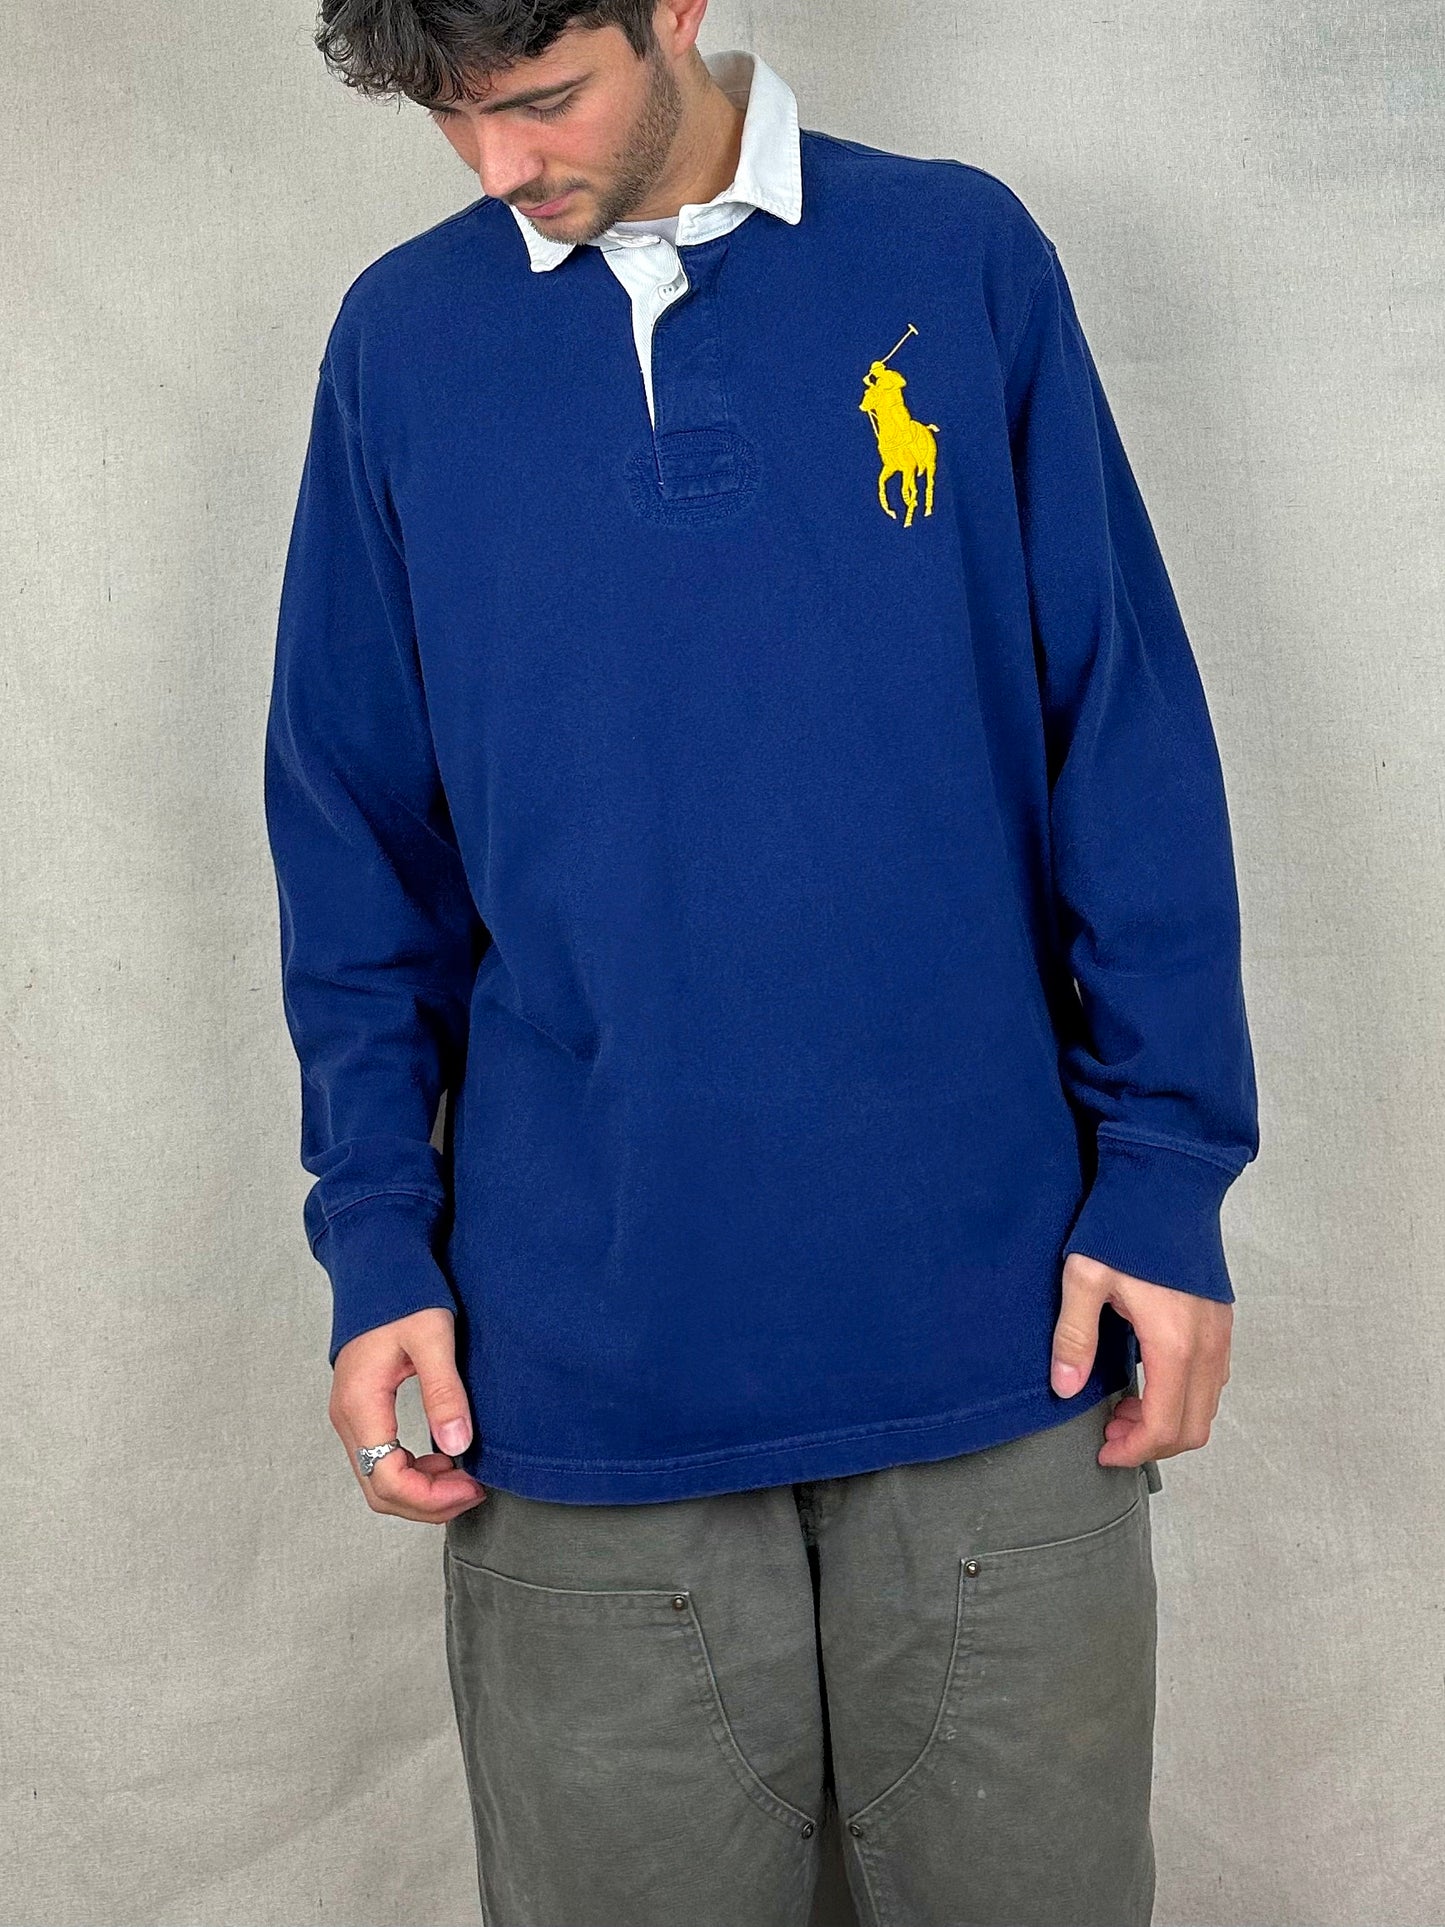 90's Ralph Lauren Embroidered Vintage Longsleeve Polo Size XL-2XL